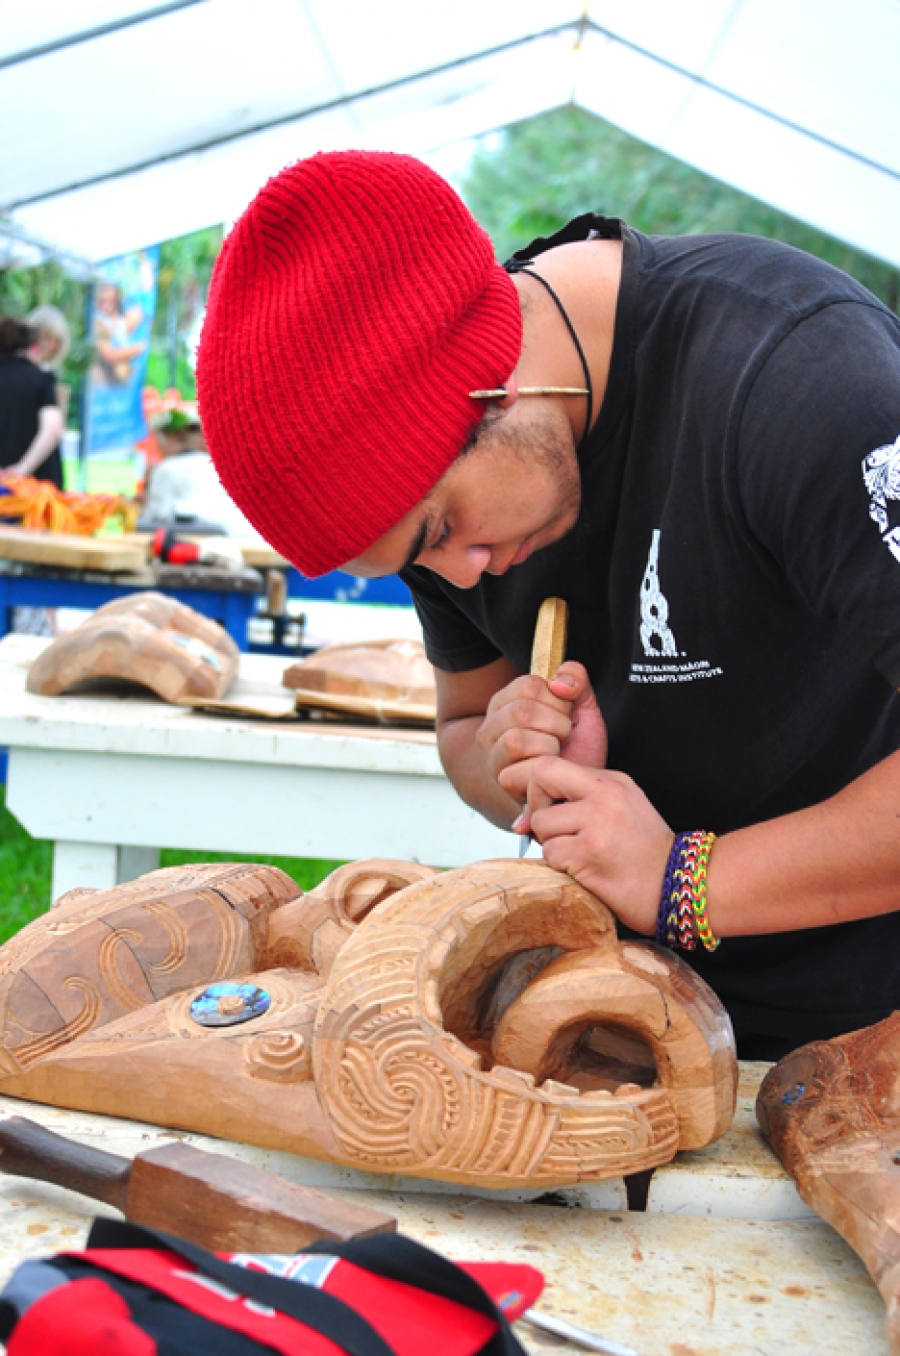 Carving new cultural links